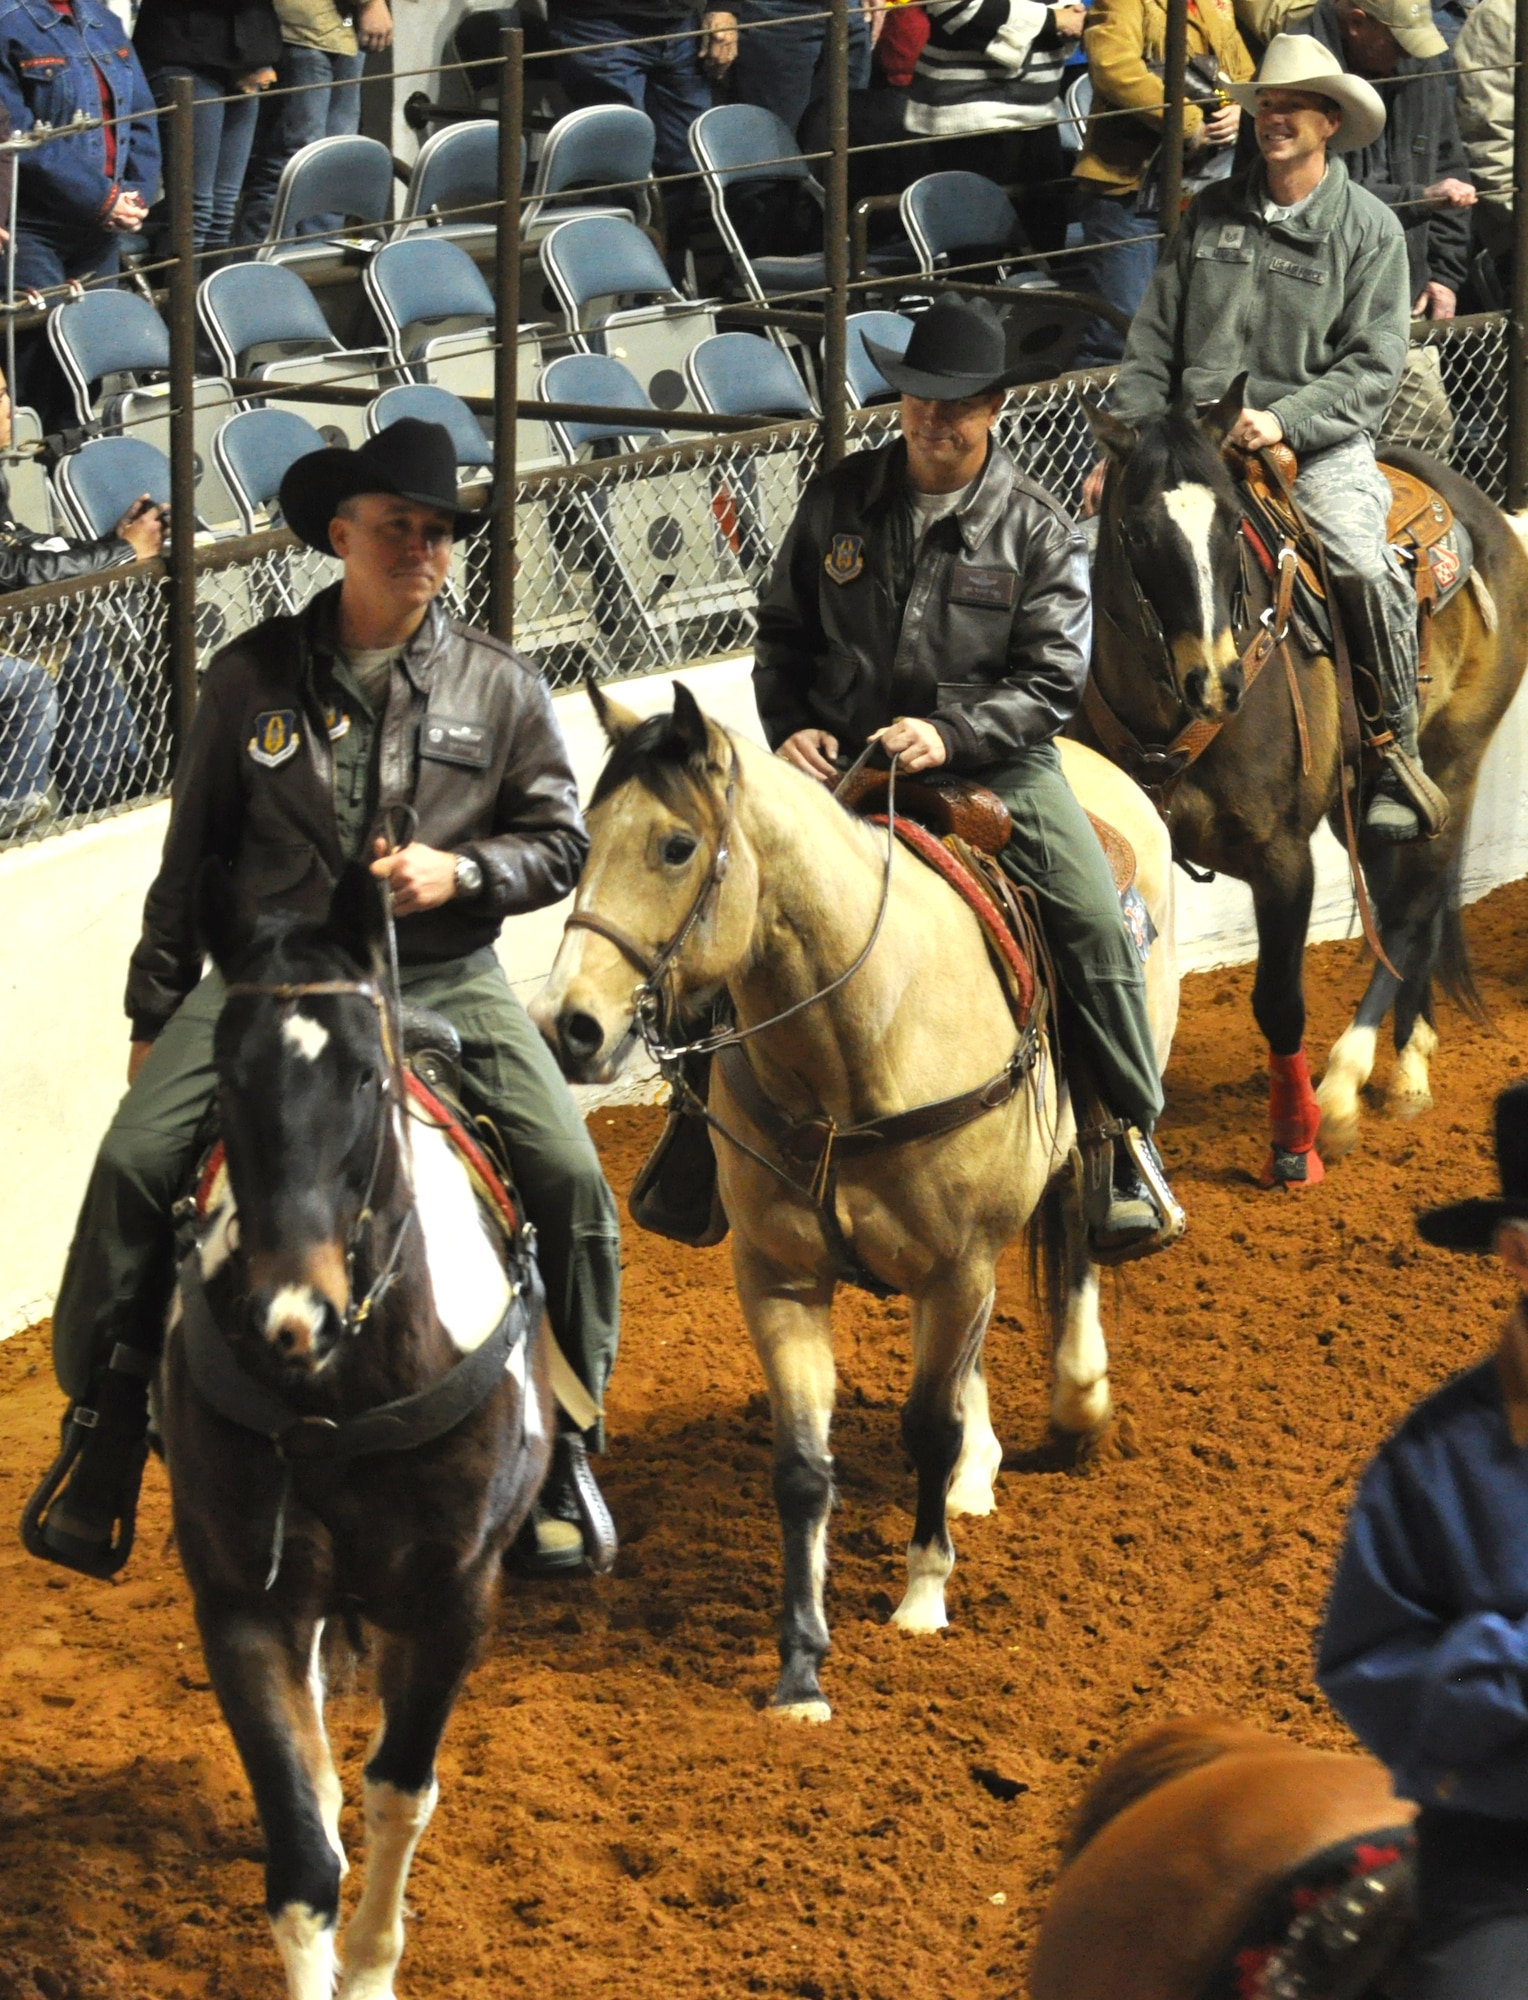 It was an exciting day at Fort Worth Stock Show and Rodeo's Military Appreciation Day yesterday. Col. John Breazeale, 301st Fighter Wing commander, Col. Chris Yancy, 301st FW vice commander, and Tech. Sgt. Larry Marsh, 301st FW's 2013 NCO of the Year, rode in the grand entry prior to enjoying the sights and sounds of this historic annual event. (U.S. Air Force photo/Master Sgt. Julie Briden-Garcia)